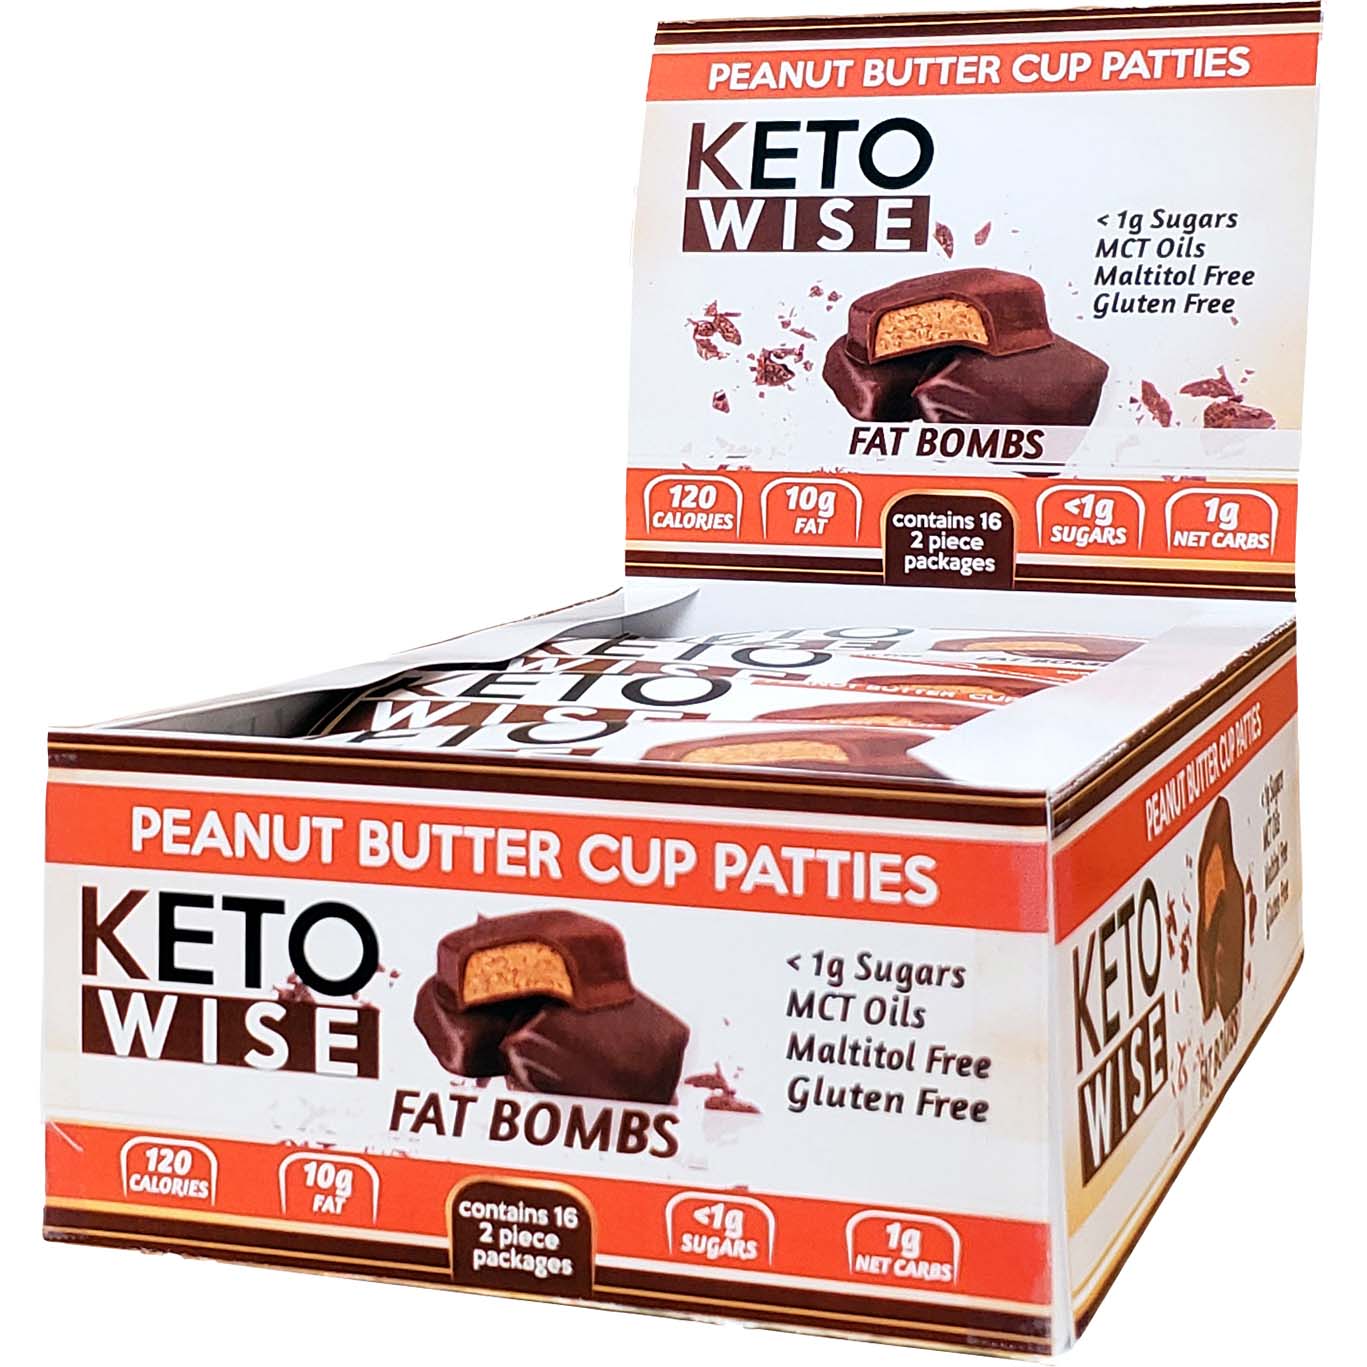 Keto Wise Fat Bombs, Peanut Butter Cup Patties, Box of 16 Pieces